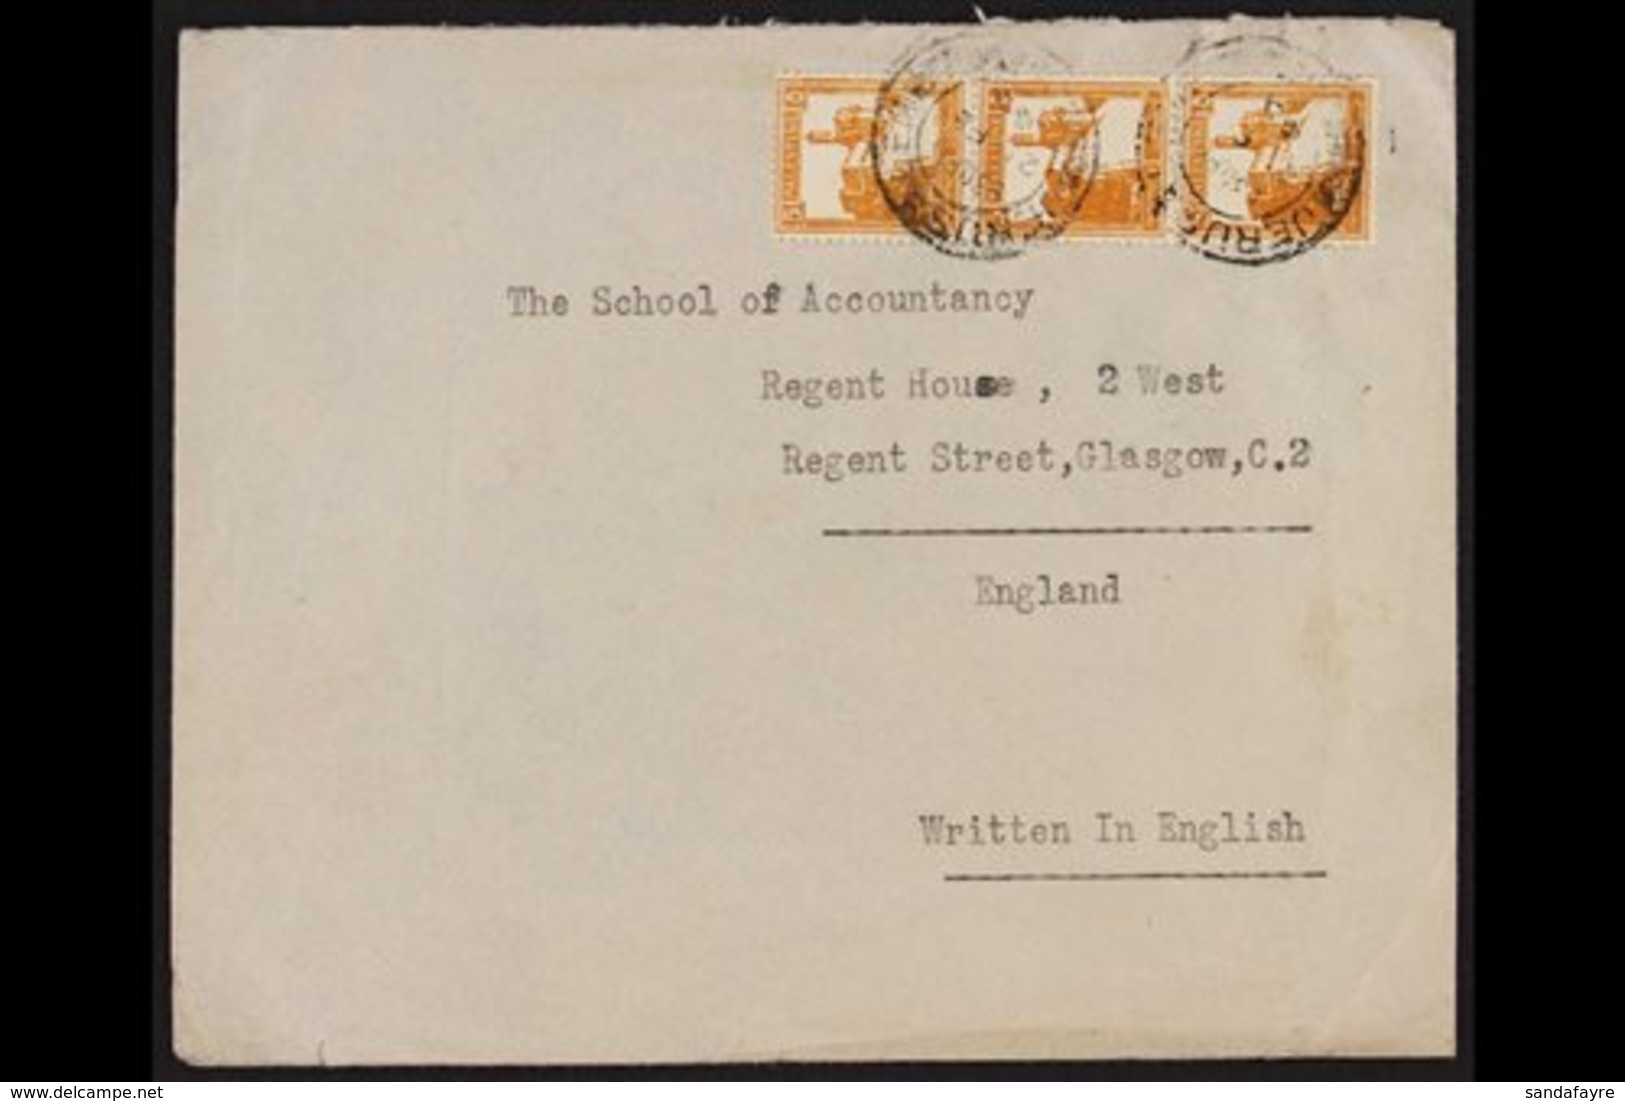 1945 Cover To England Franked 5m Coil Strip Of 3, SG 93a, Tied By Jerusalem 21 Feb 45 Cds. For More Images, Please Visit - Palästina